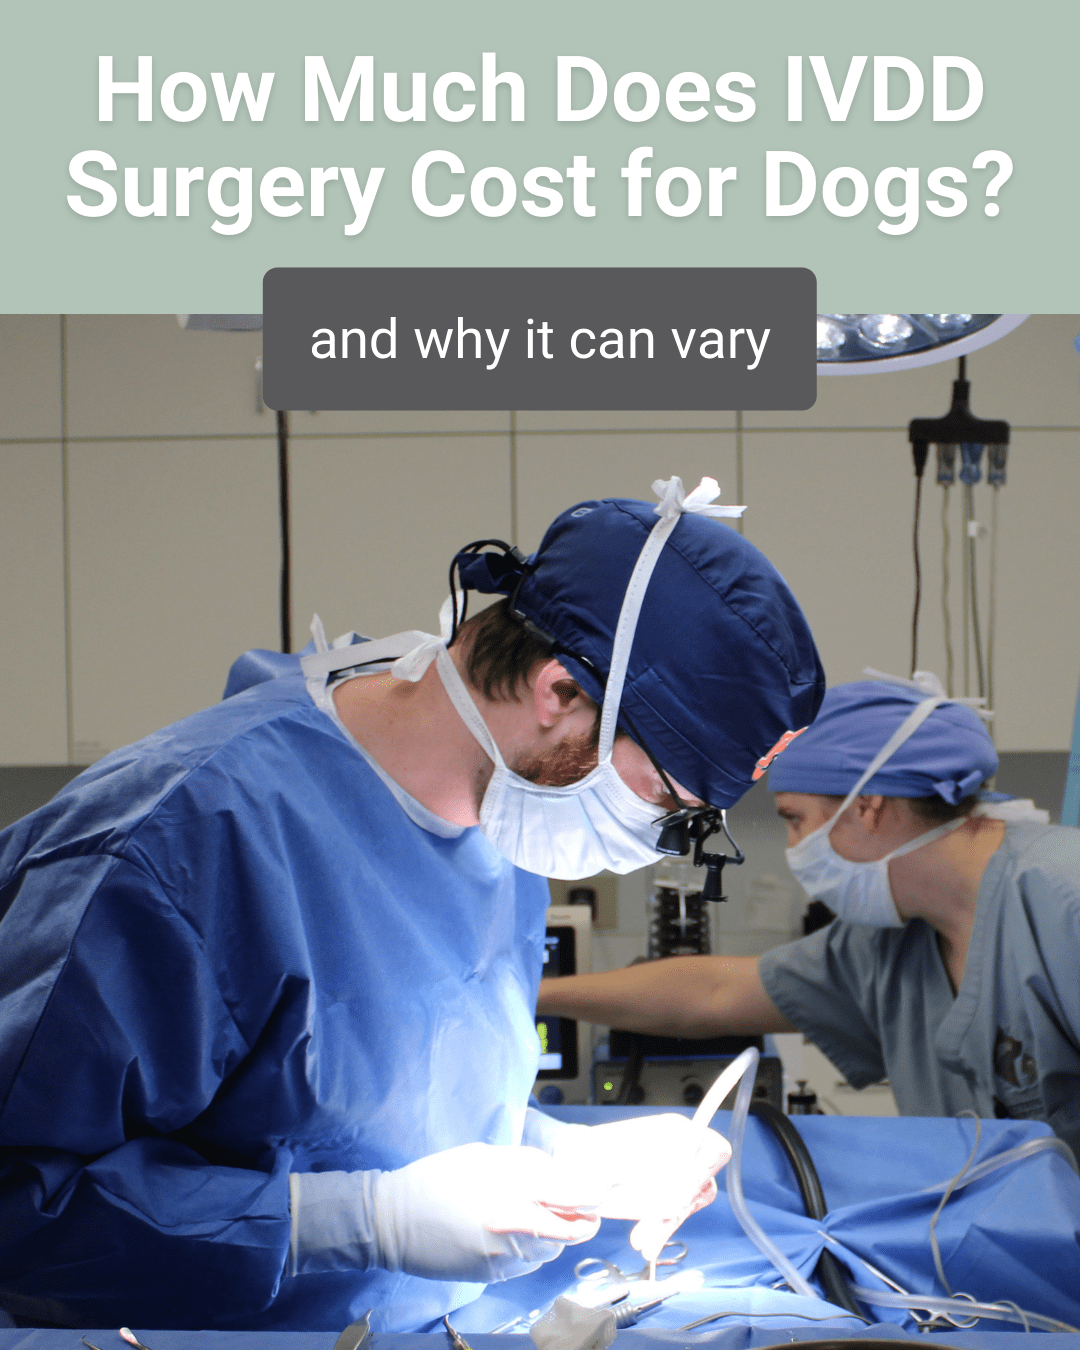 How Much Does IVDD Surgery Cost for Dogs?